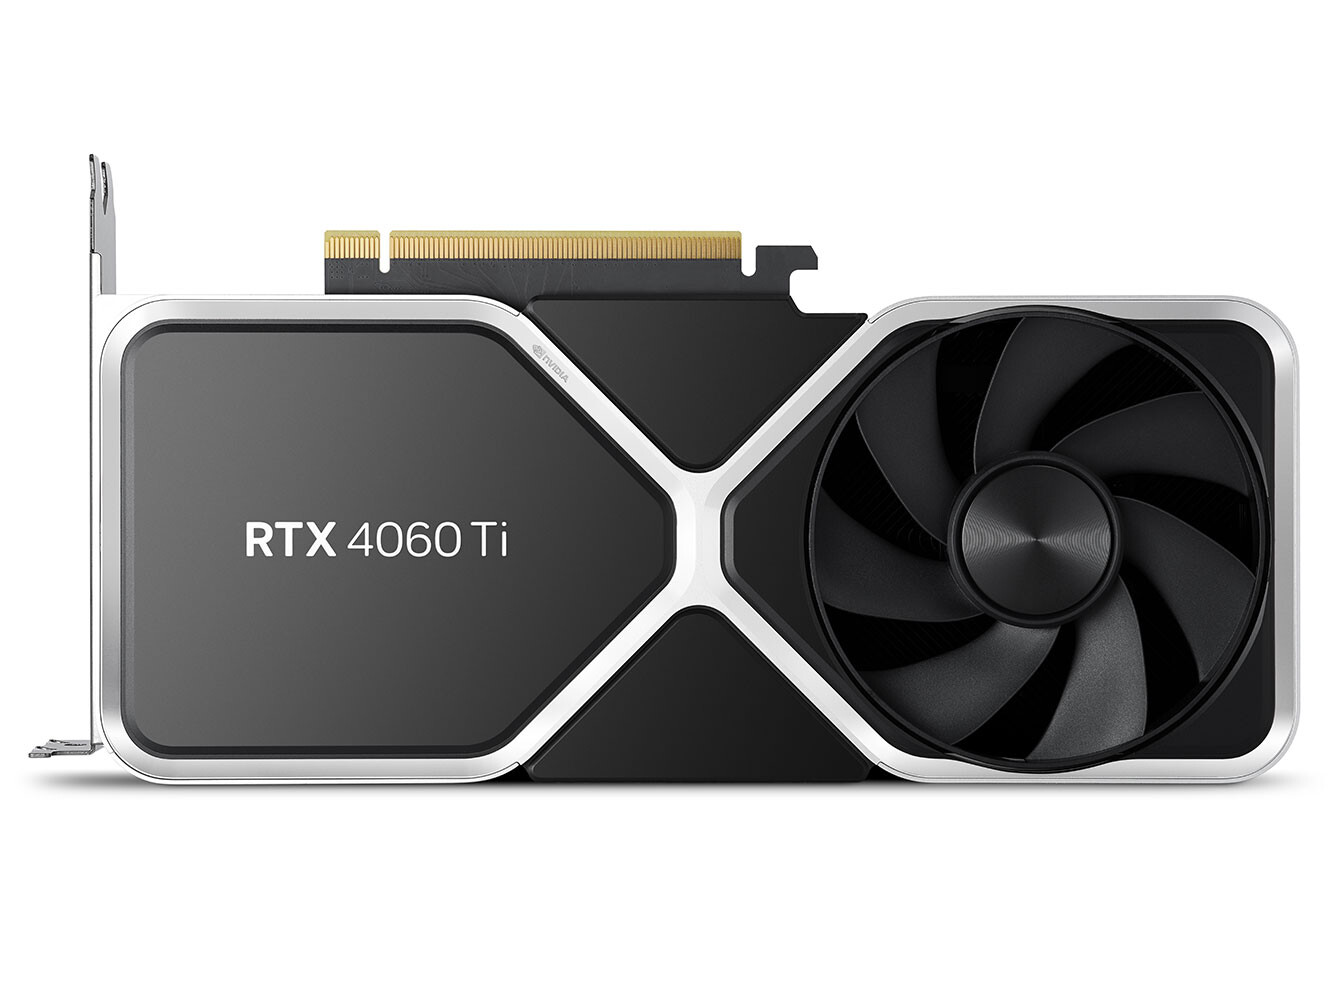 AMD Radeon RX 6800 16GB is now available for €399, cheaper and faster than  RTX 4060 Ti 